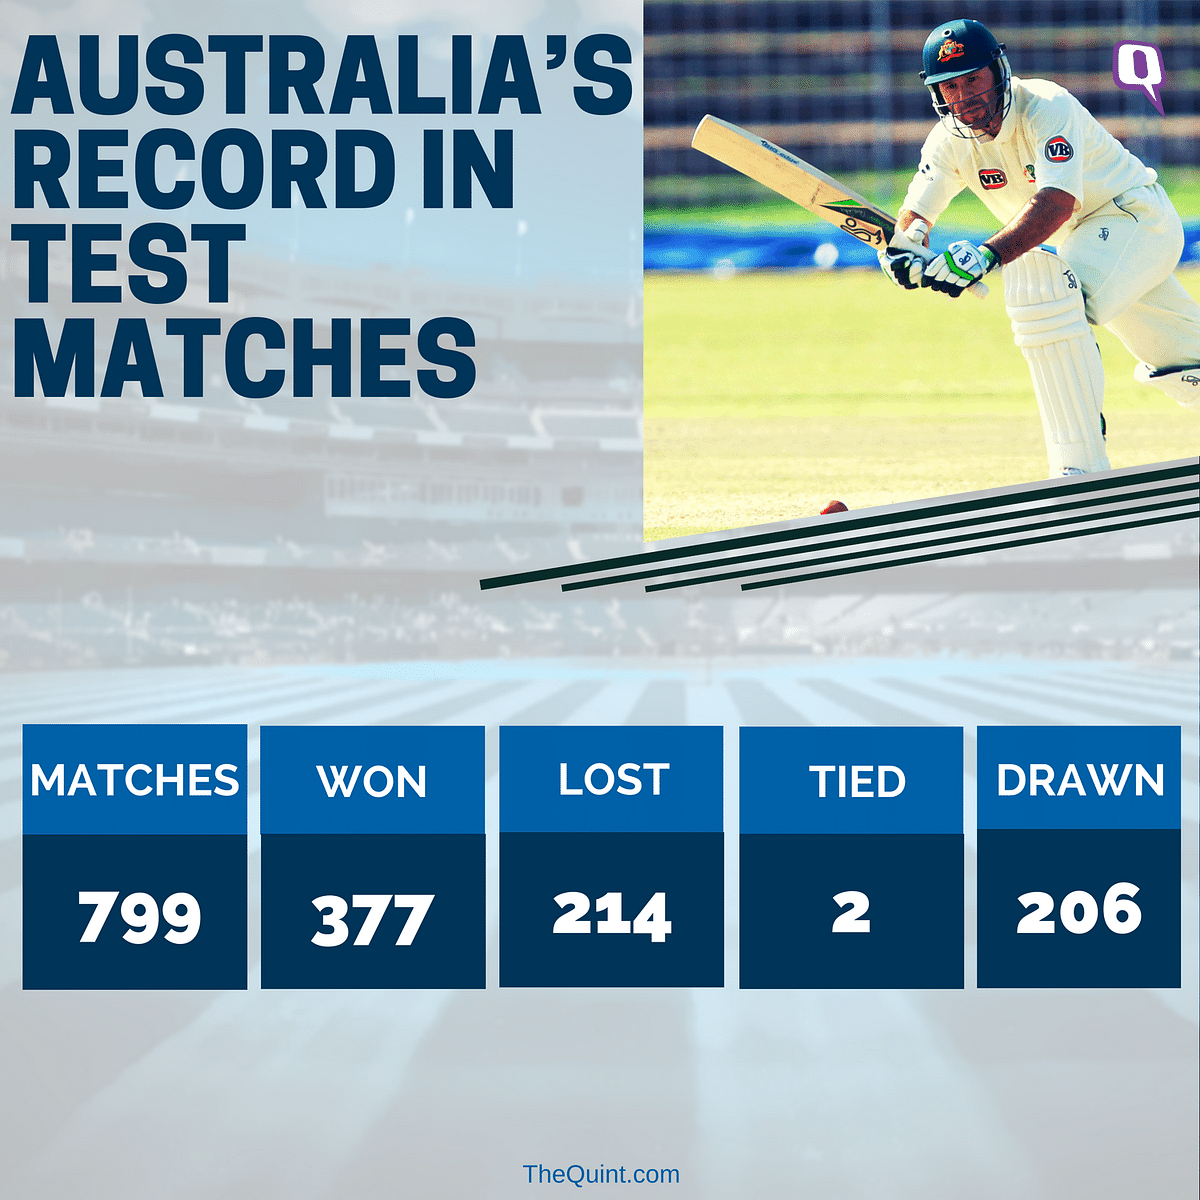 In Australia’s 800th Test, and the venue’s first - who will take the honours?